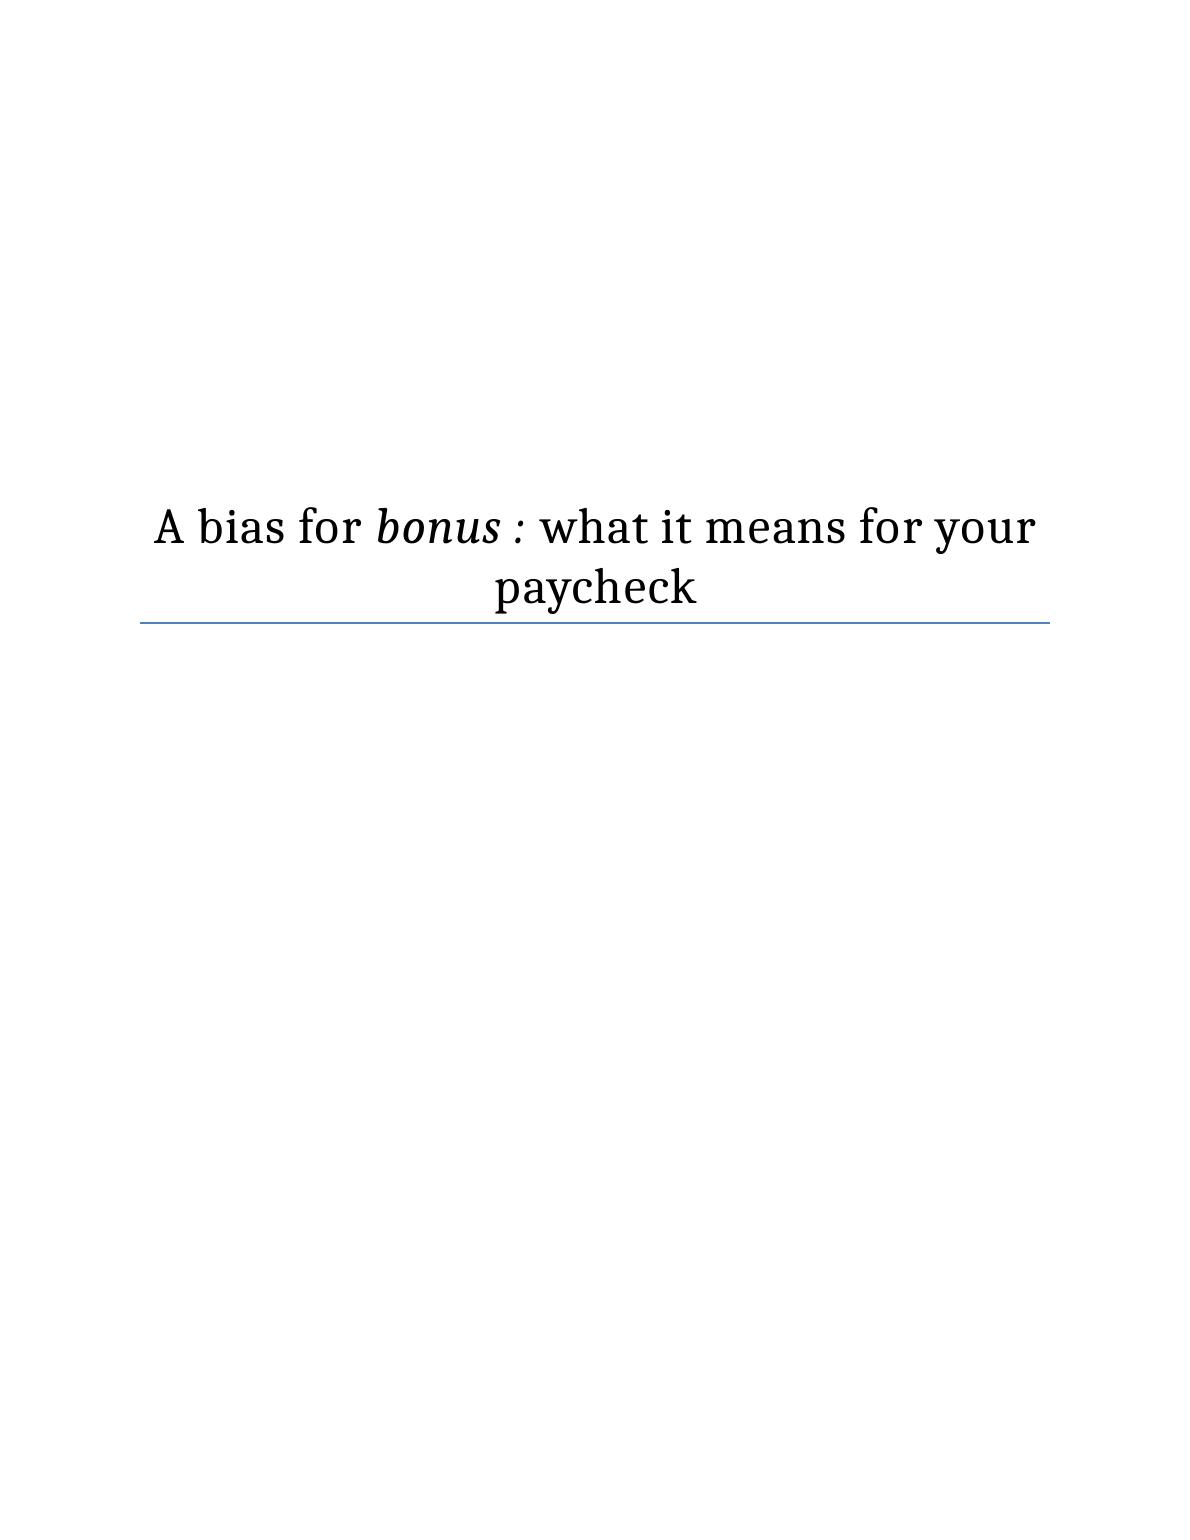 A bias for bonus : what it means for your paycheck_1